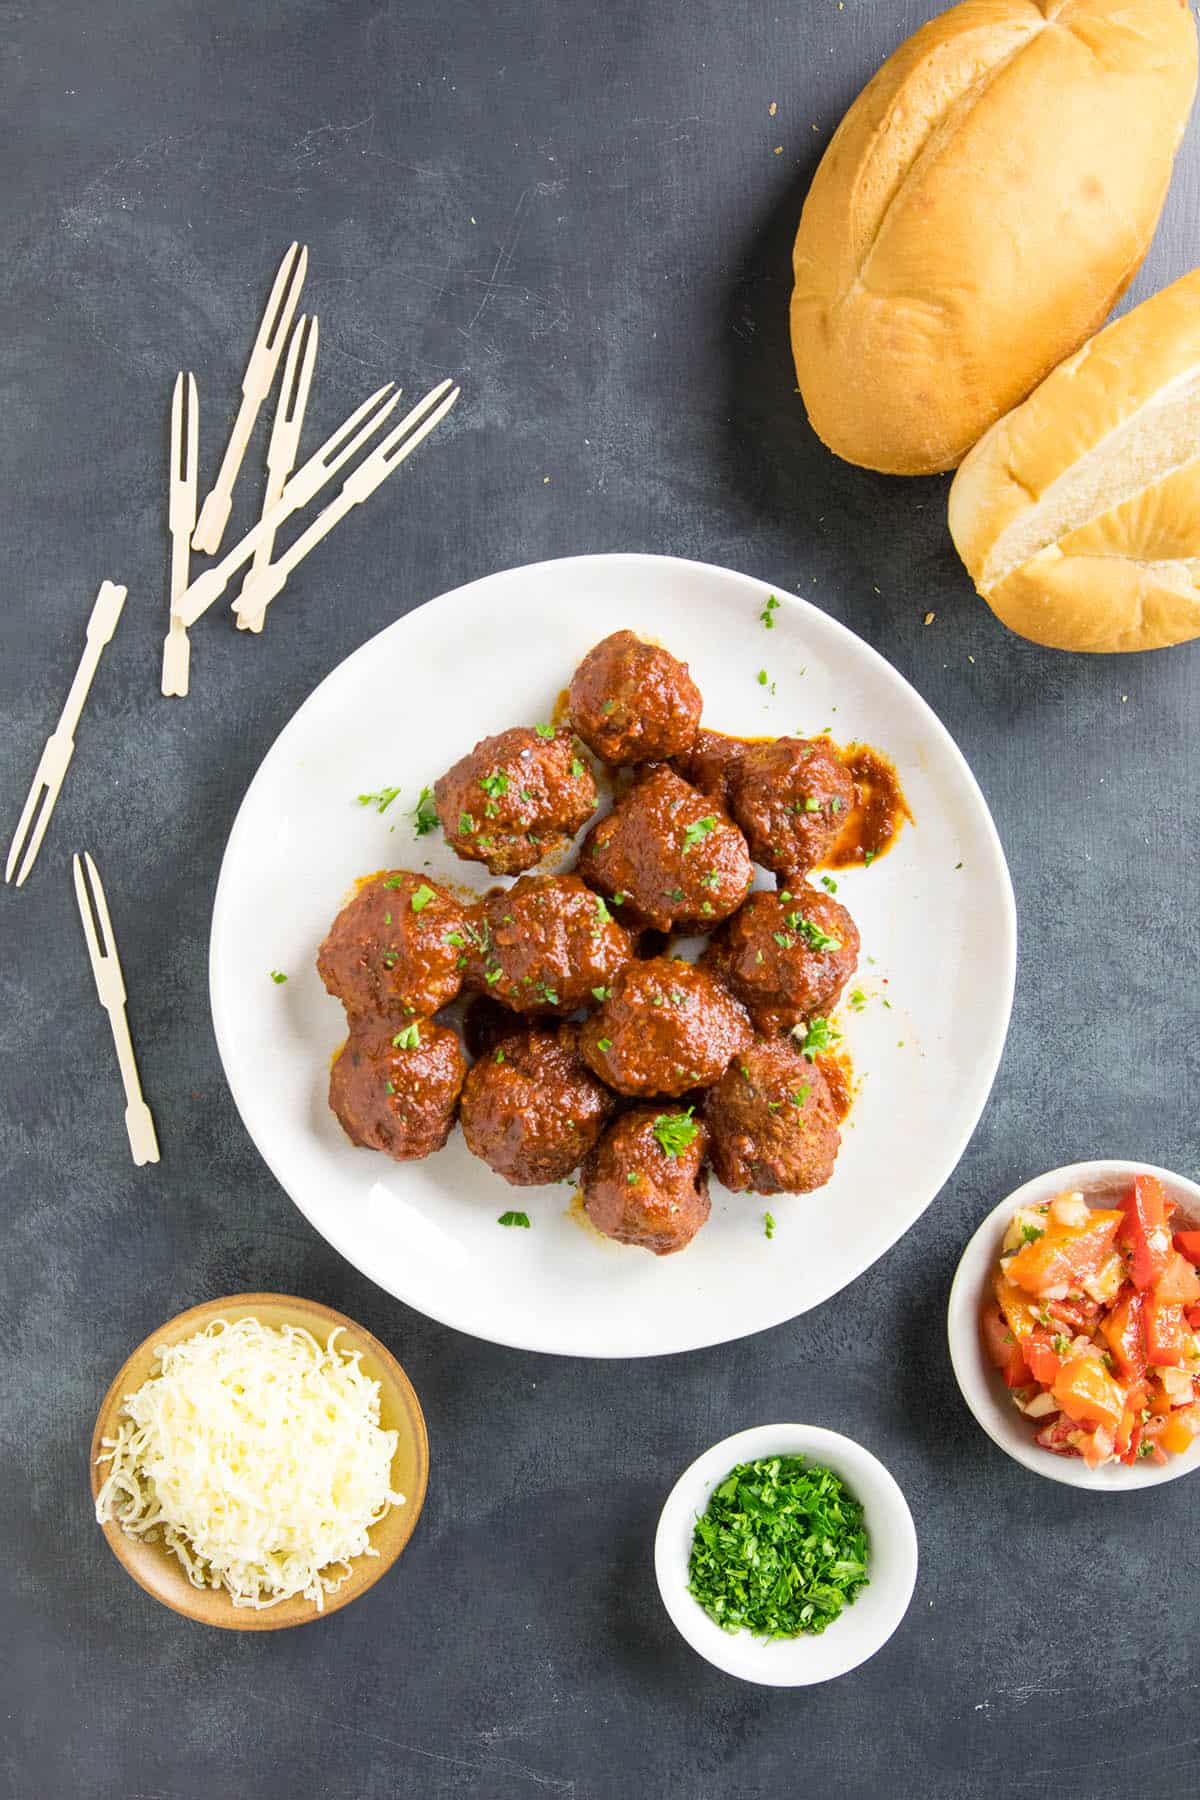 Spicy Meatballs Chipotle Lime Sauce - Serve on sandwiches or as an appetizer.